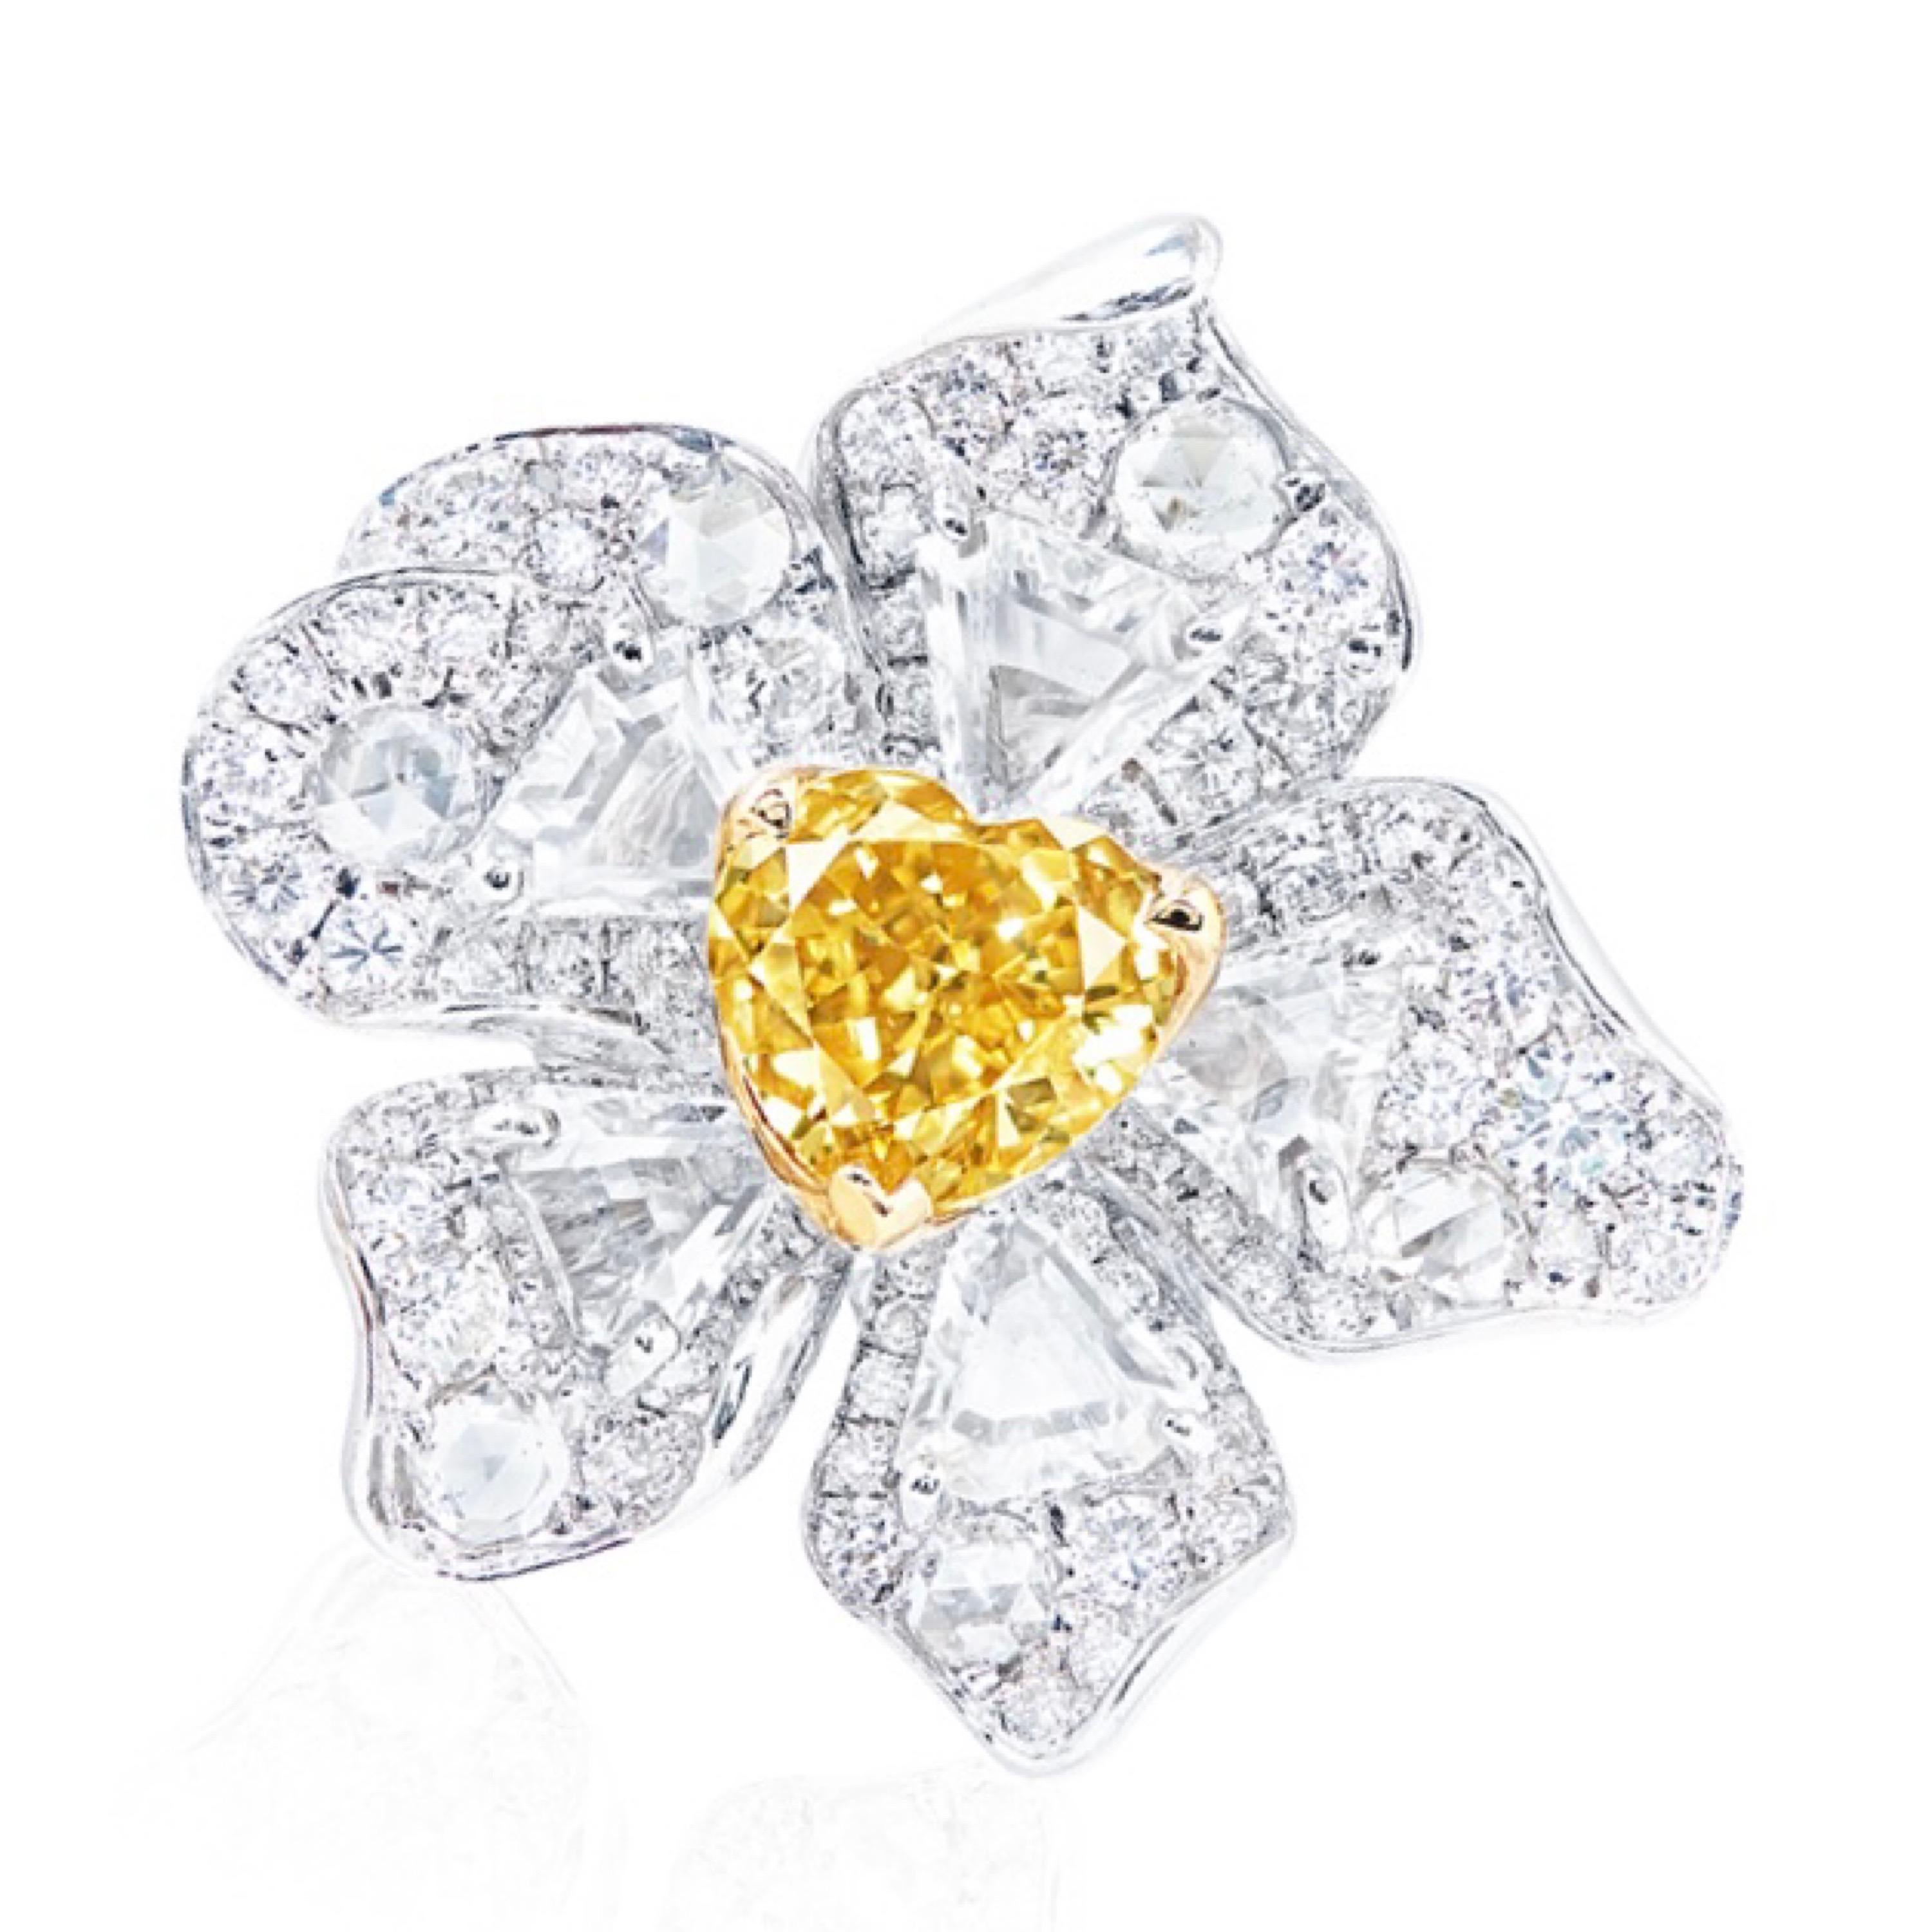 From the museum vault at Emilio Jewelry New York.
Main stone: Gia certified natural 1.00 carats Fancy Intense Yellow heart.
Setting: 72 white diamonds totaling approximately 0.72 carats, 5 white diamonds totaling approximately 1.20 carats, 6